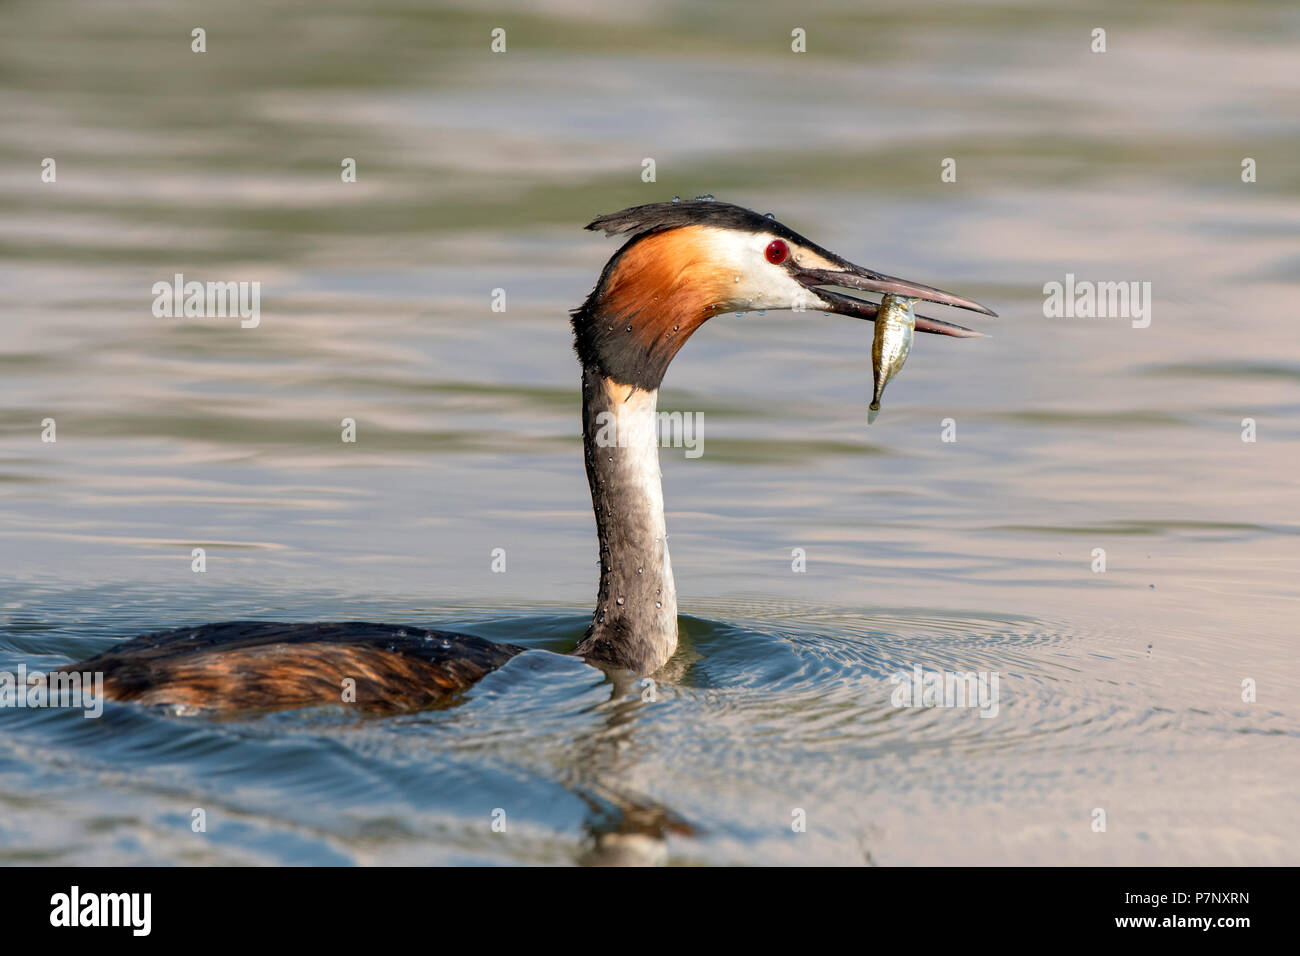 Great crested grebe (Podiceps cristatus) swimming in water with captured fish in its beak, Lake Constance, Vorarlberg, Austria Stock Photo